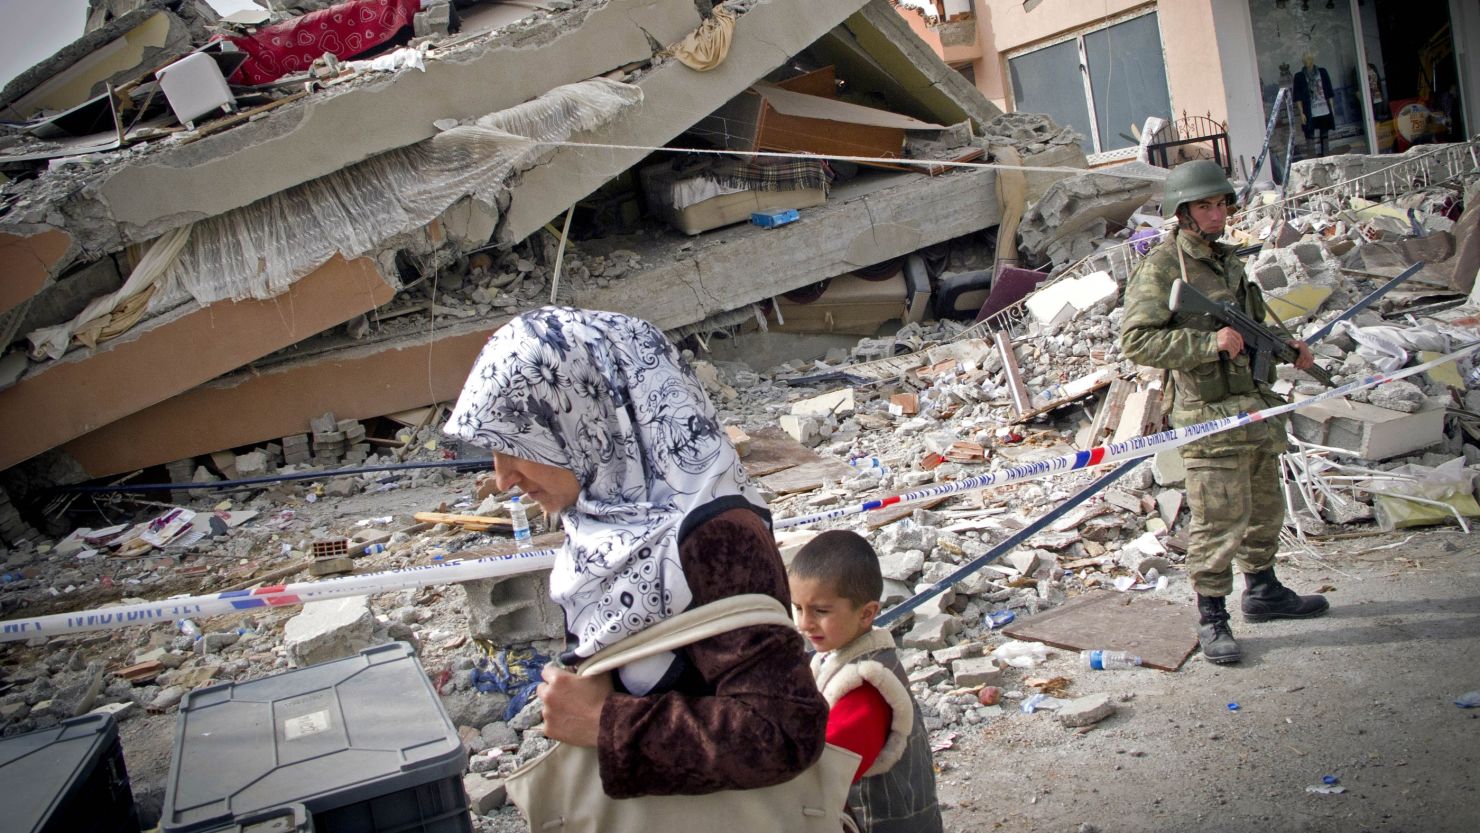  A woman and child walk past a collapsed building, as a soldier stands guard after the earthquake. 